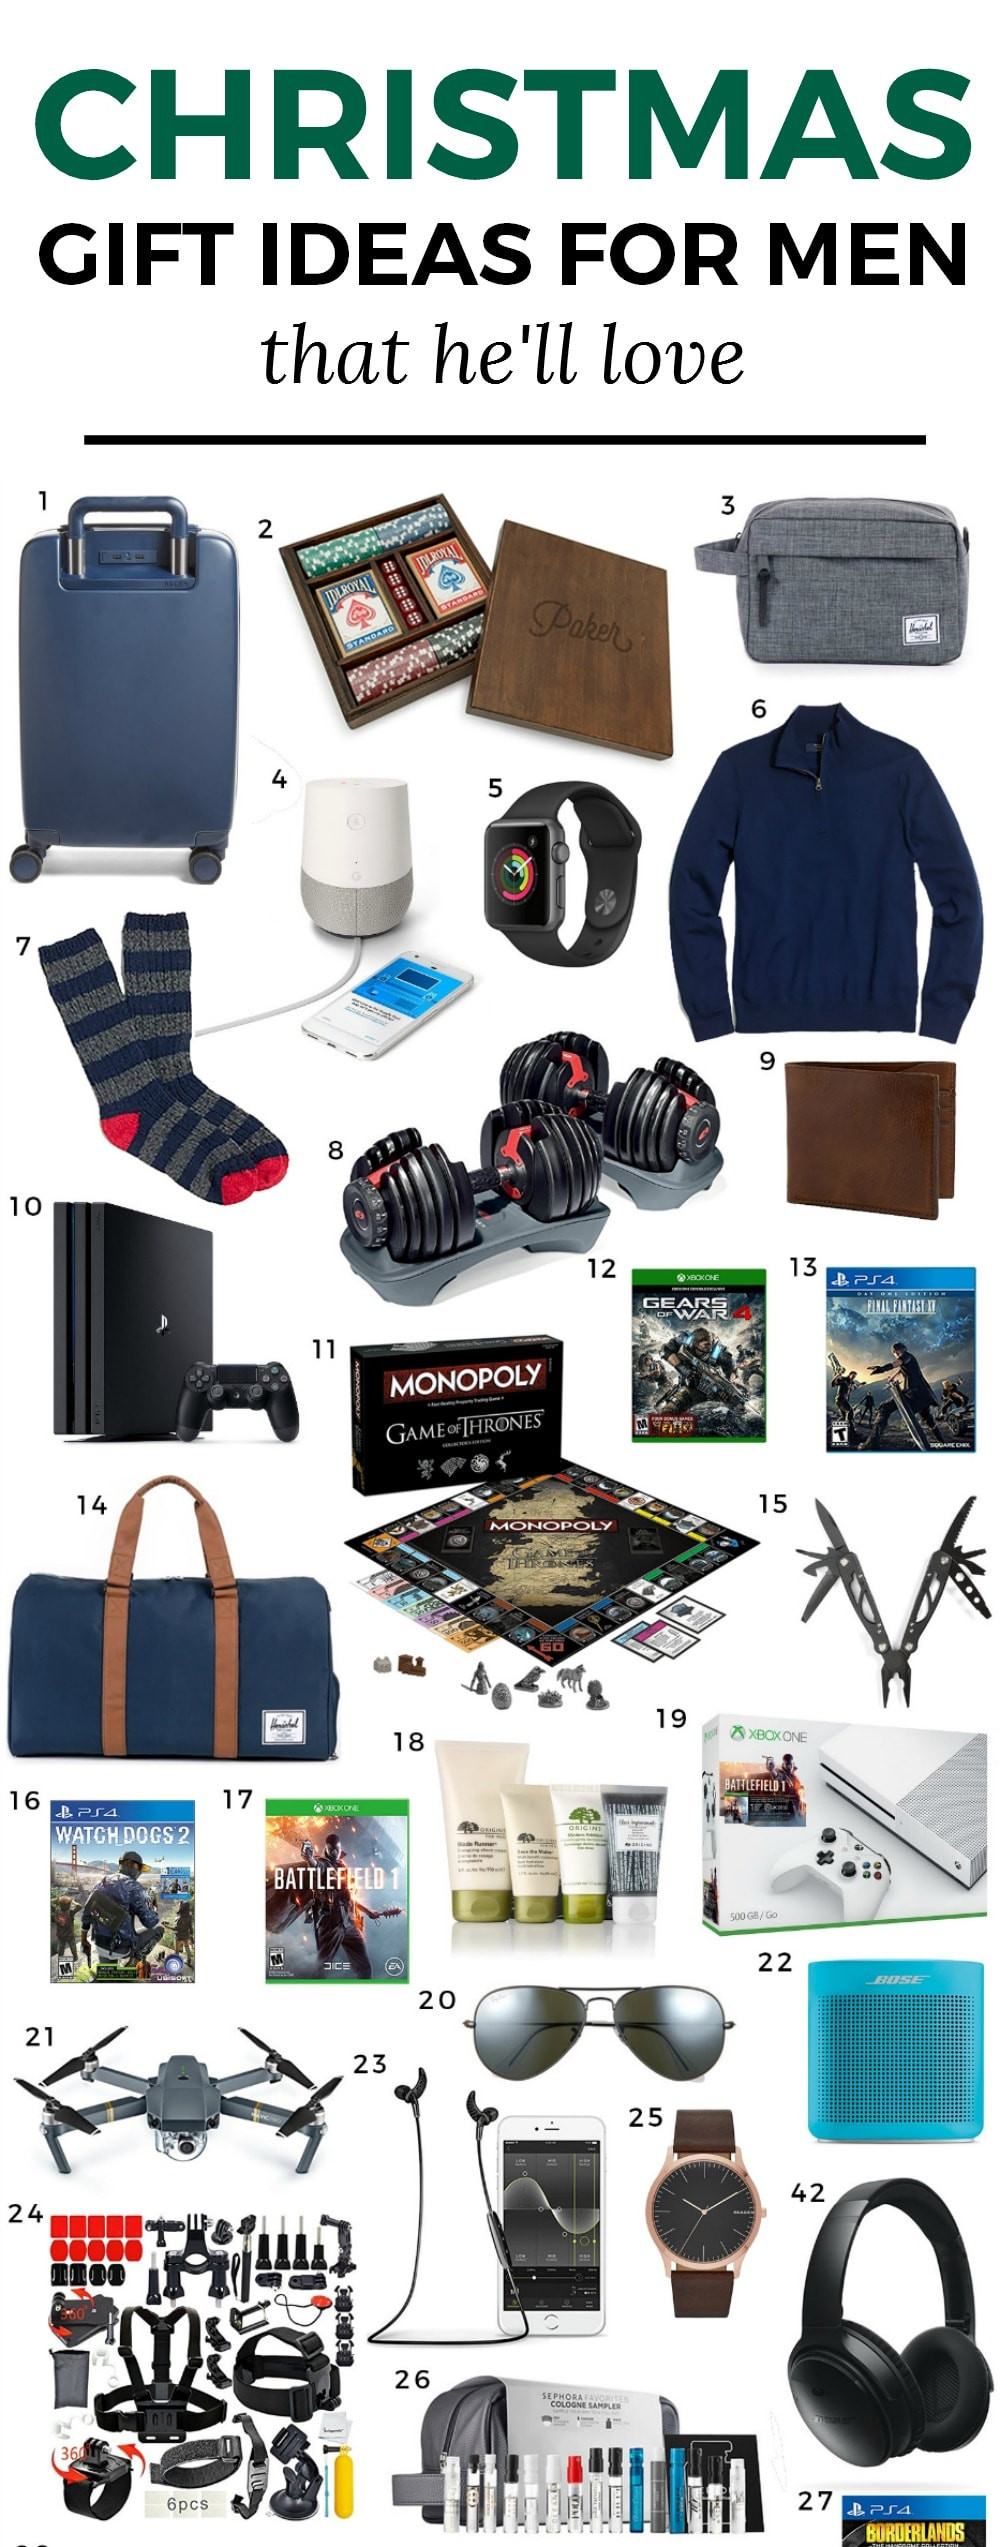 Holiday Gift Ideas For Guys
 The Best Christmas Gift Ideas for Men